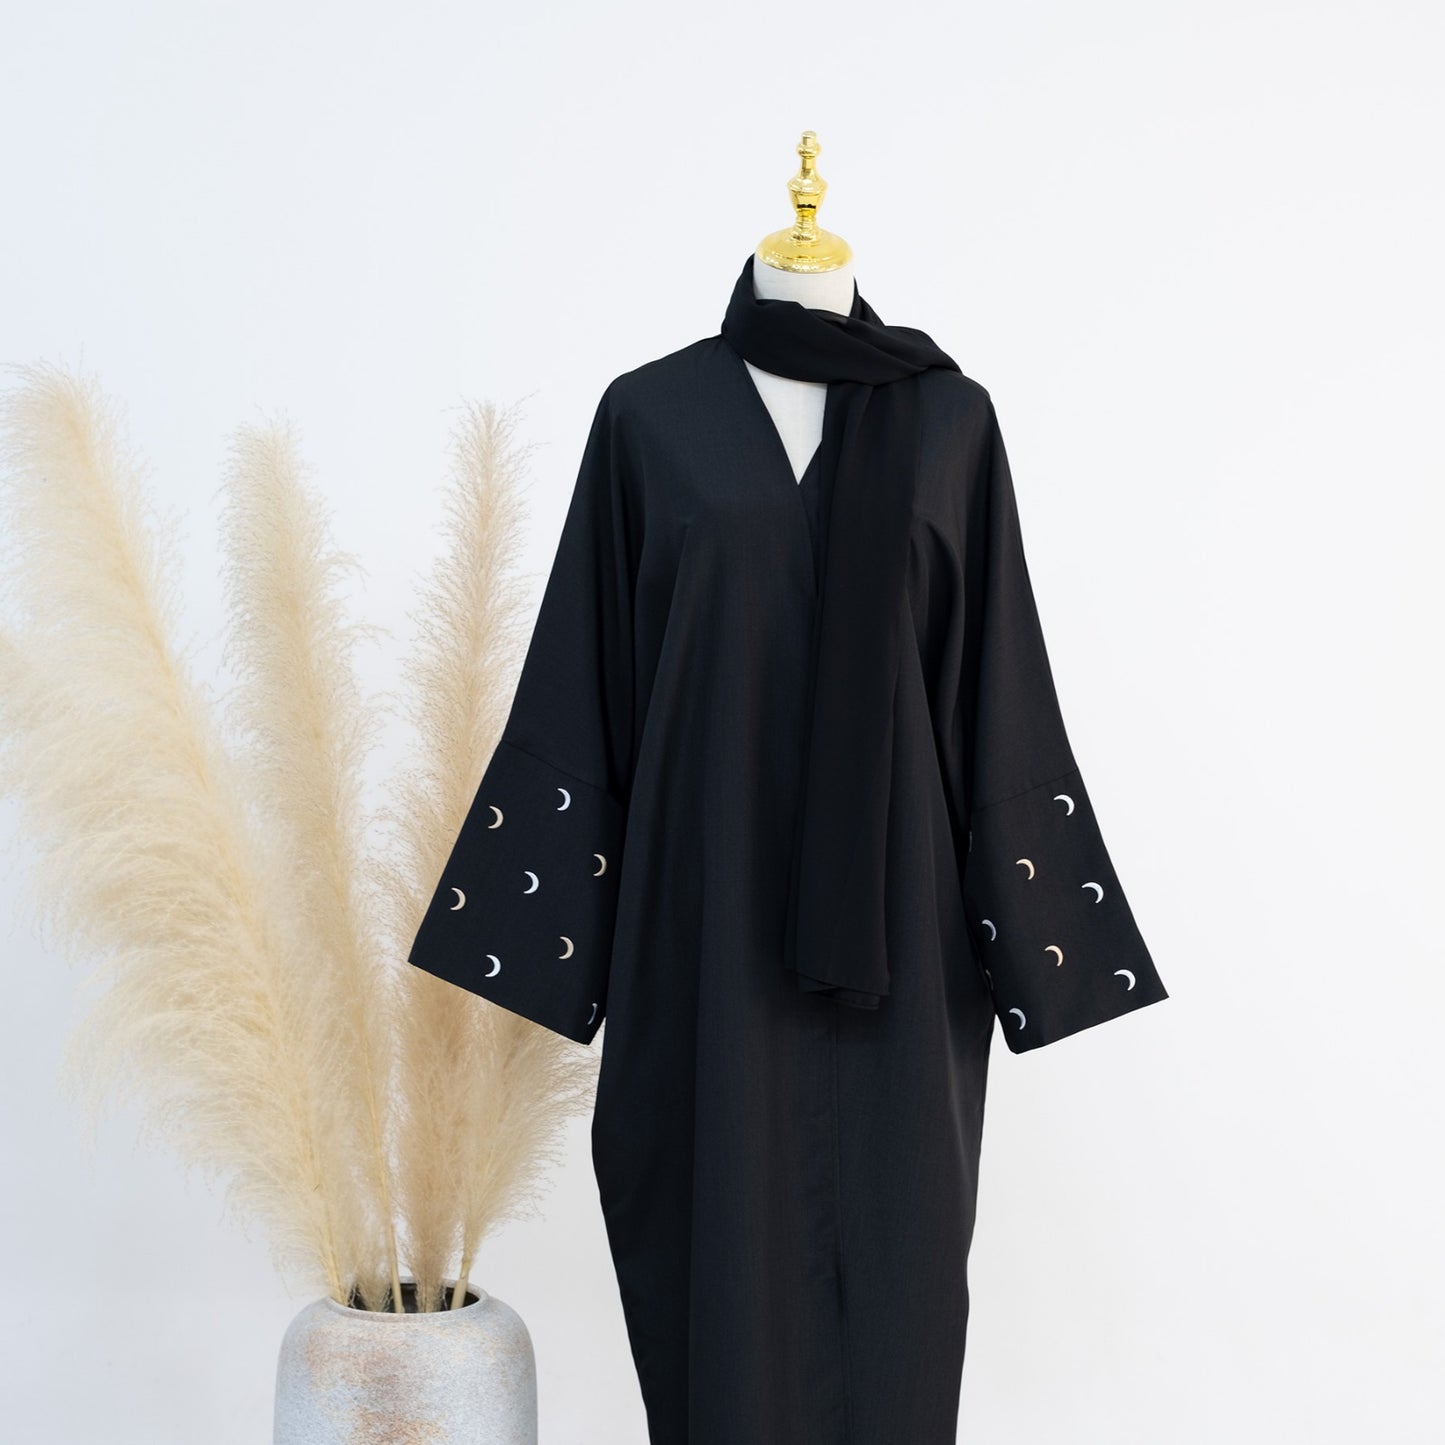 Kamar Open Abaya (with buttons) - Black